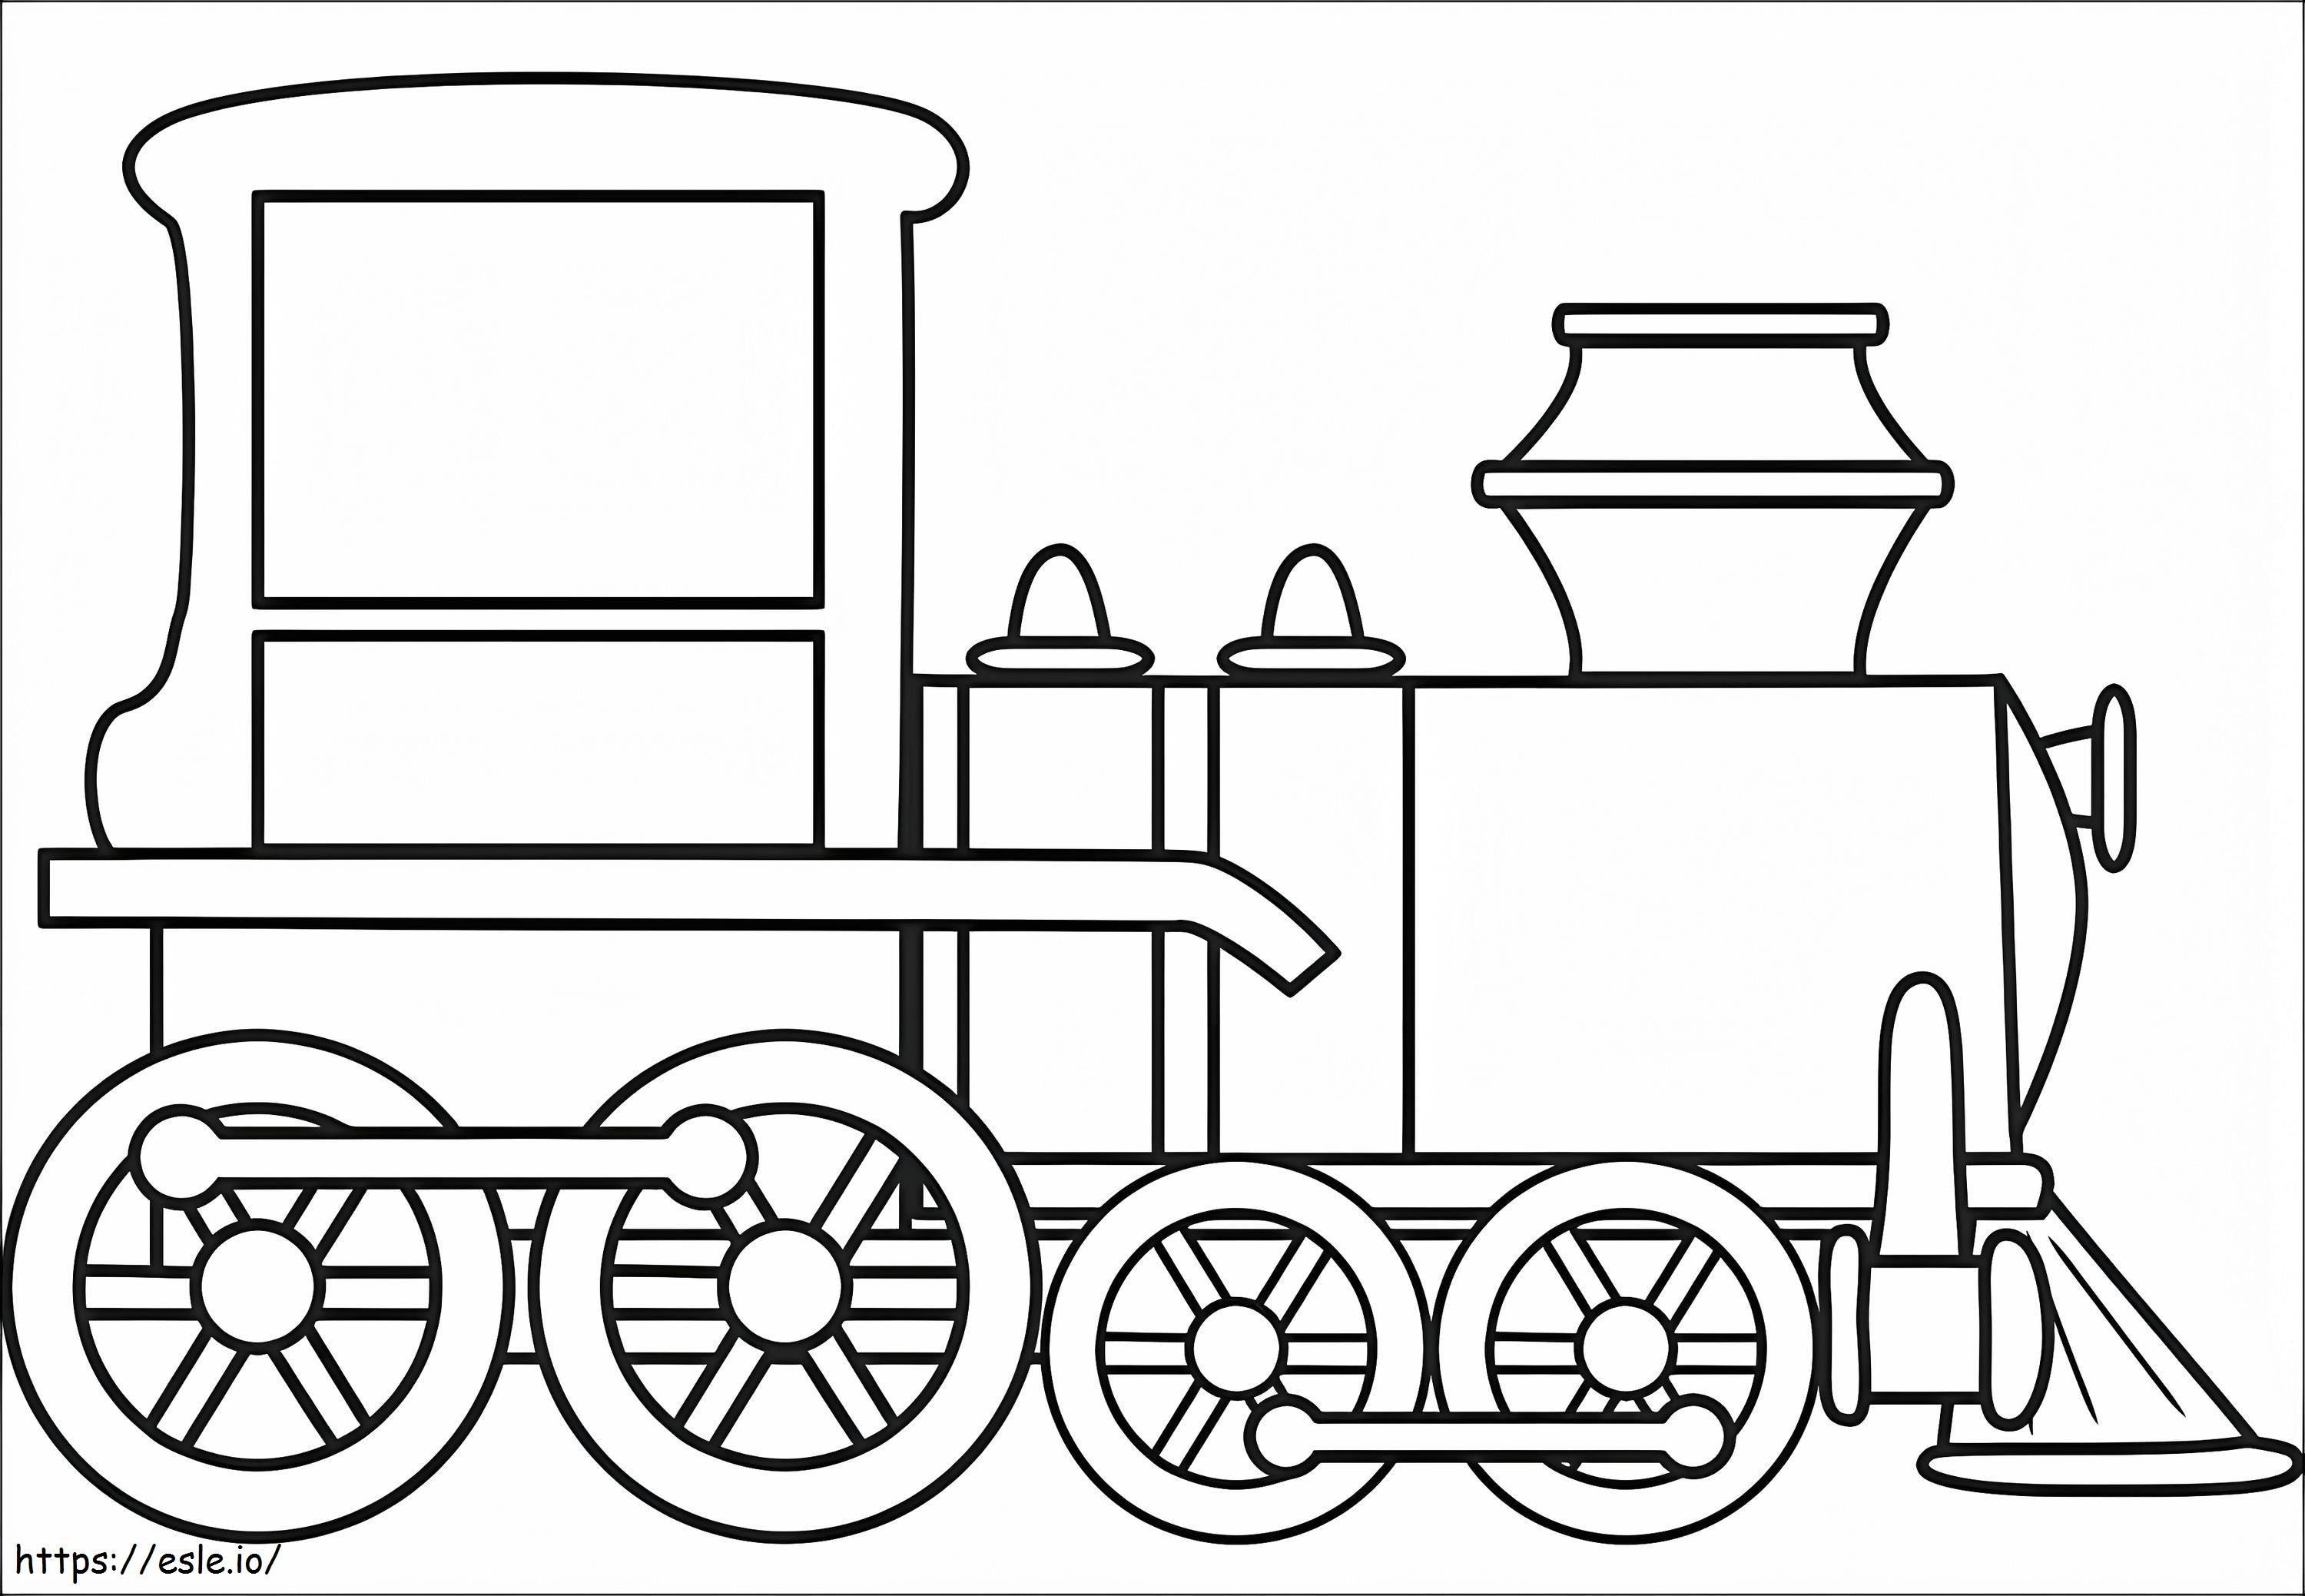 Simple Train coloring page